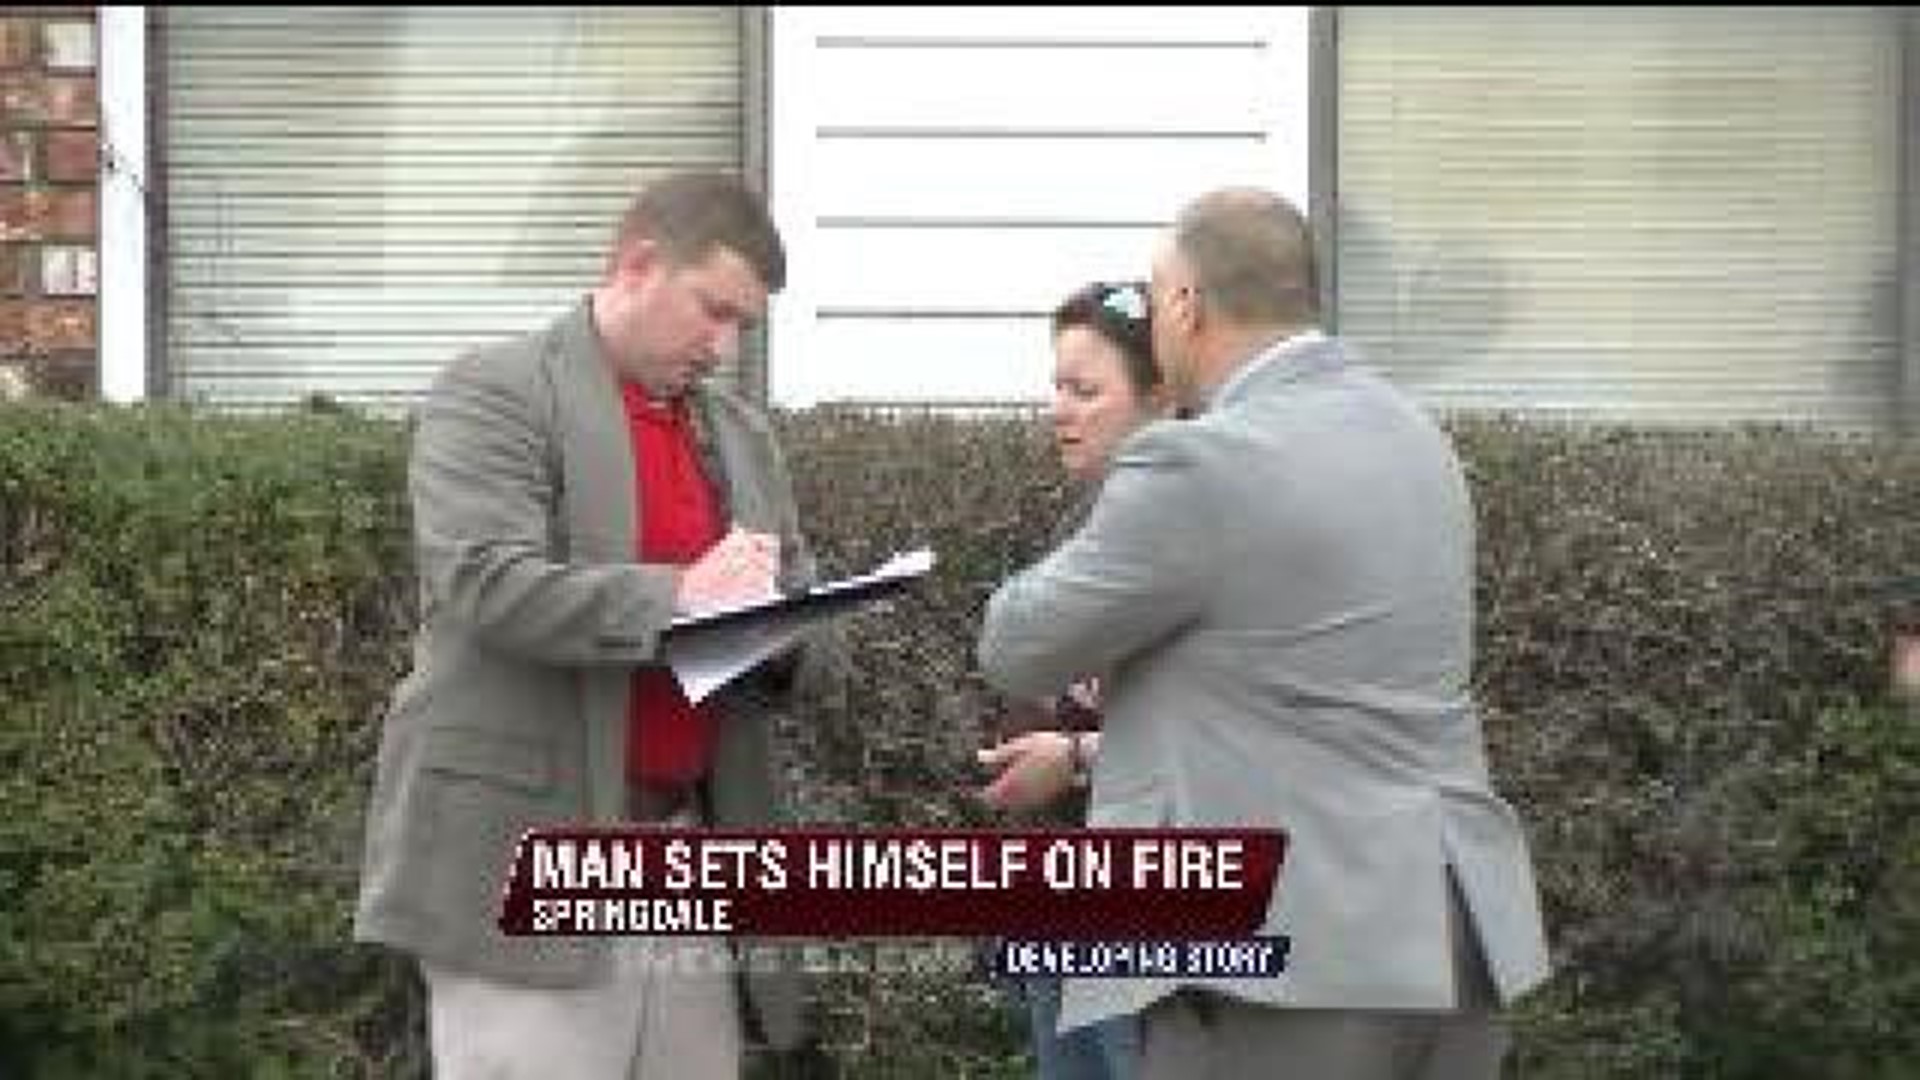 Man Catches Himself on Fire